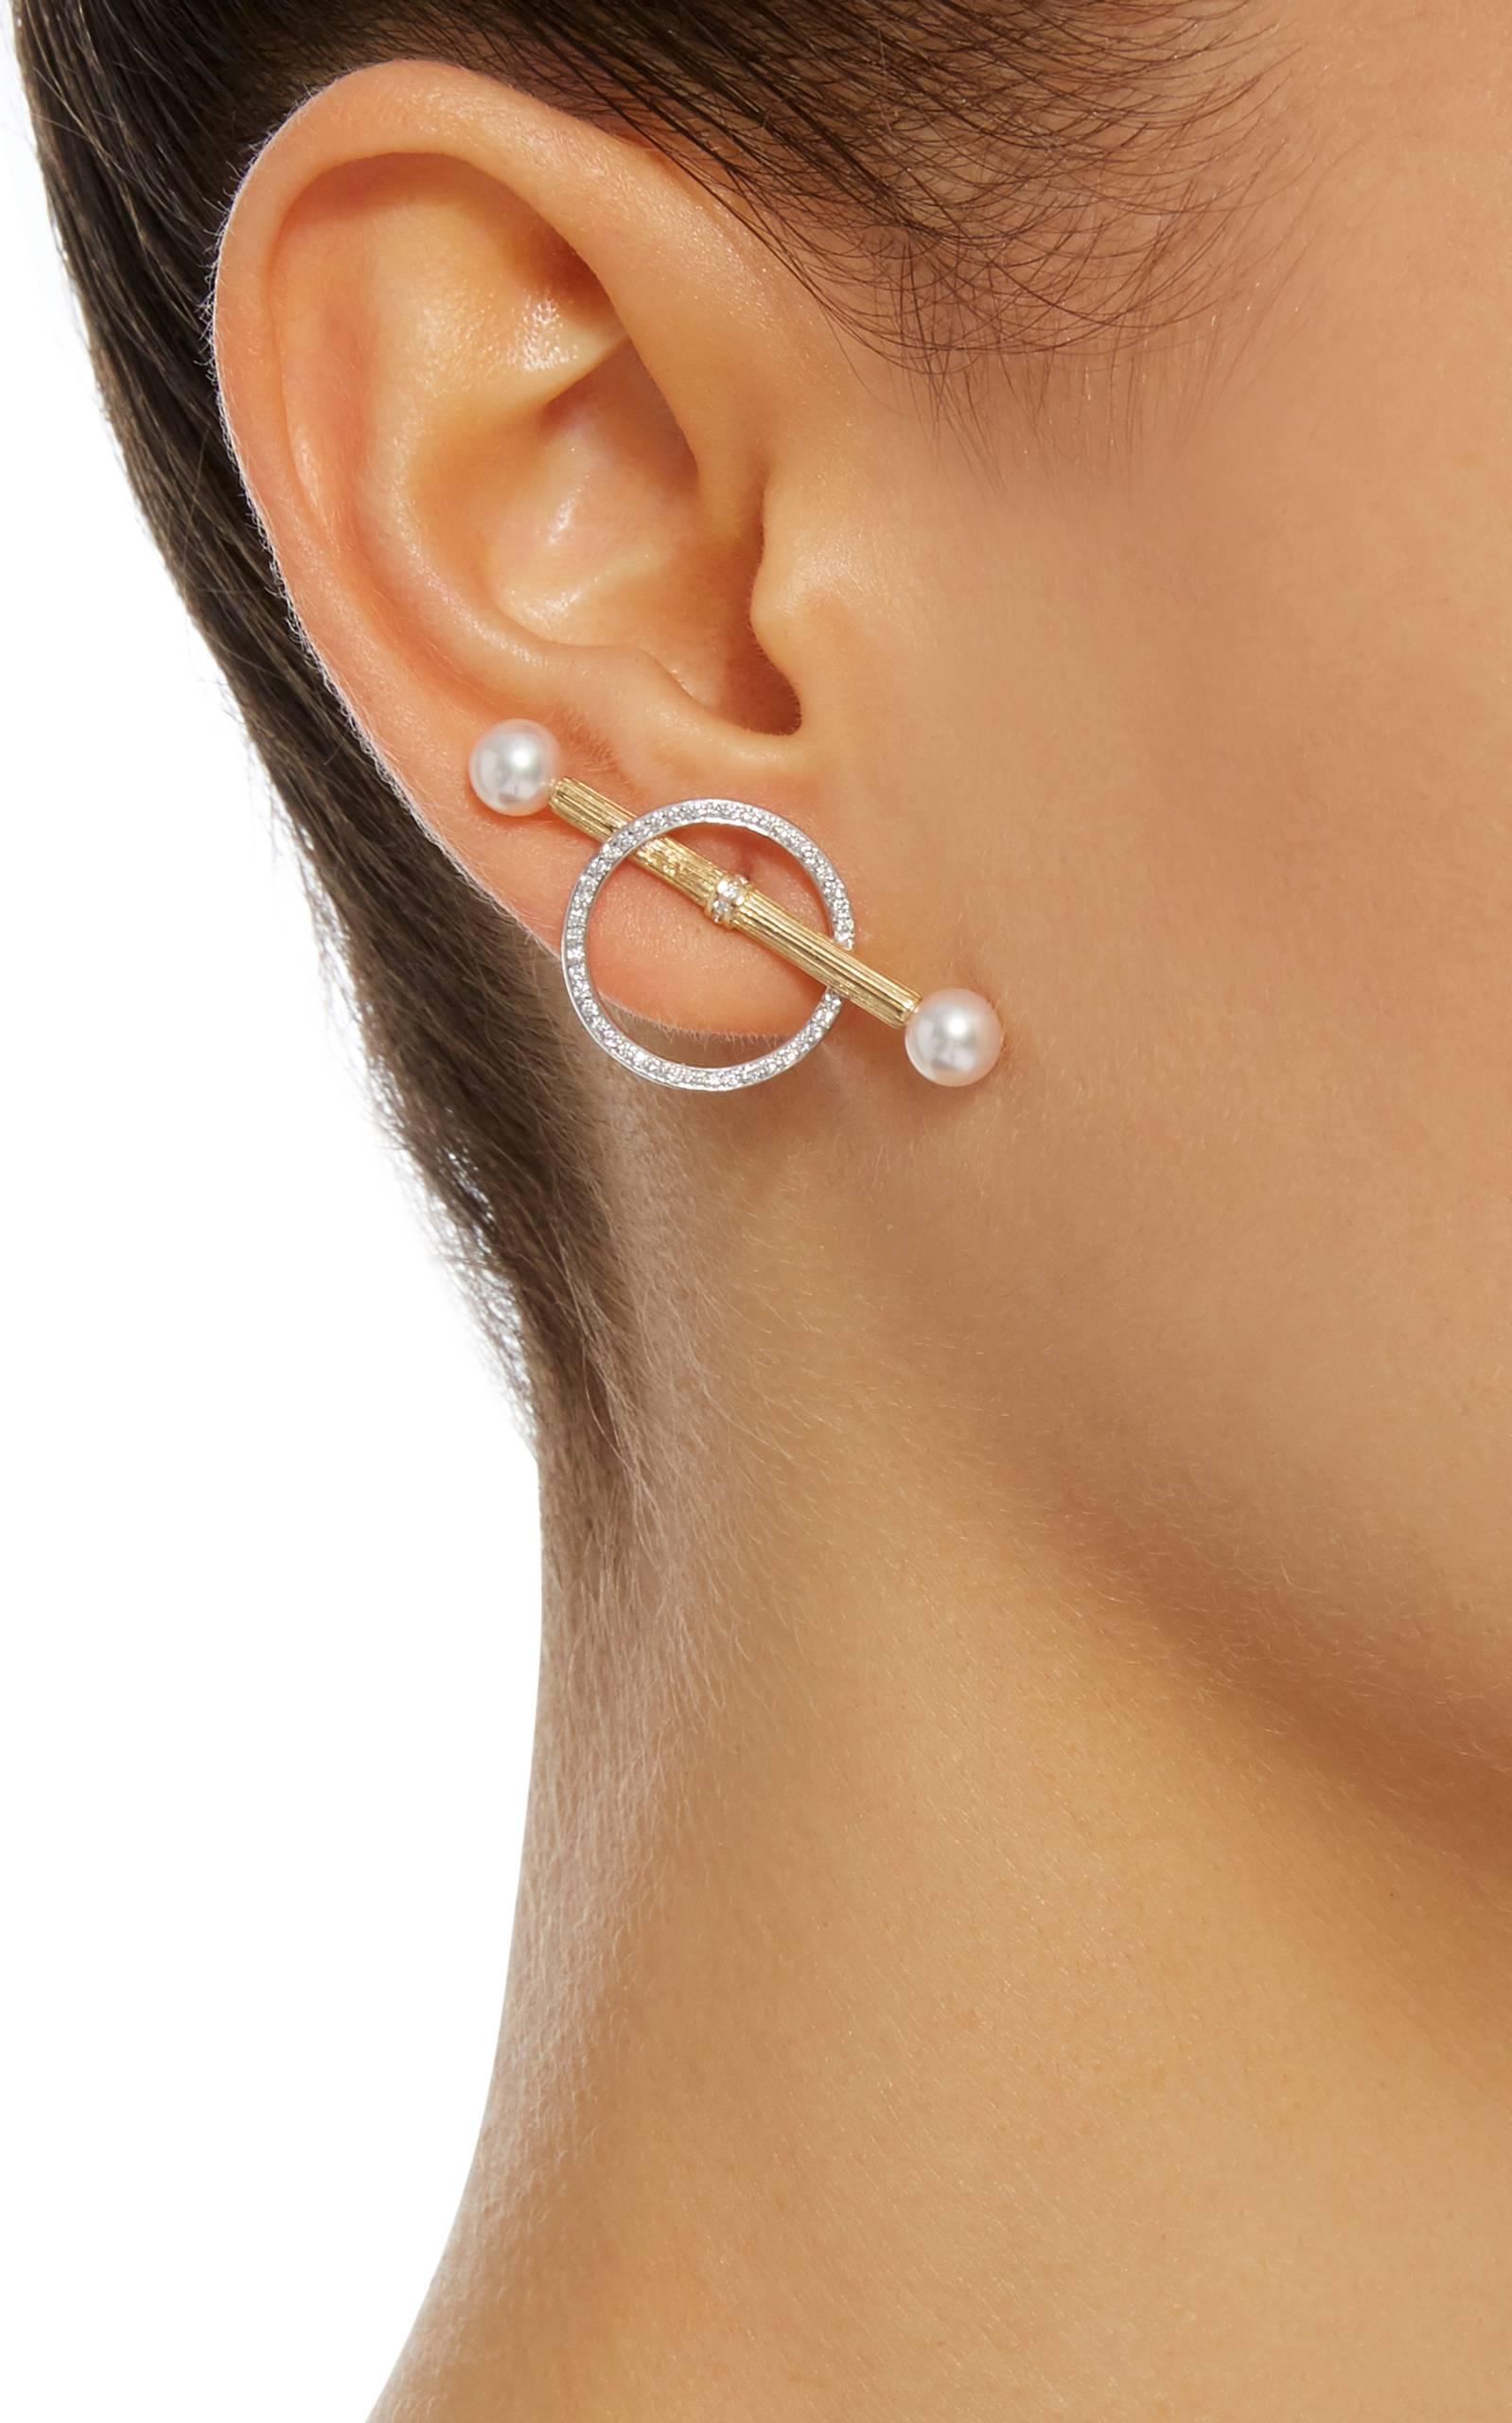 Earring in gold 18 carats 2,9gr approx.
Diamonds 0,20 carats approx.
Pearls 5/5,5
Sold by Unit
Alpa System of closure 